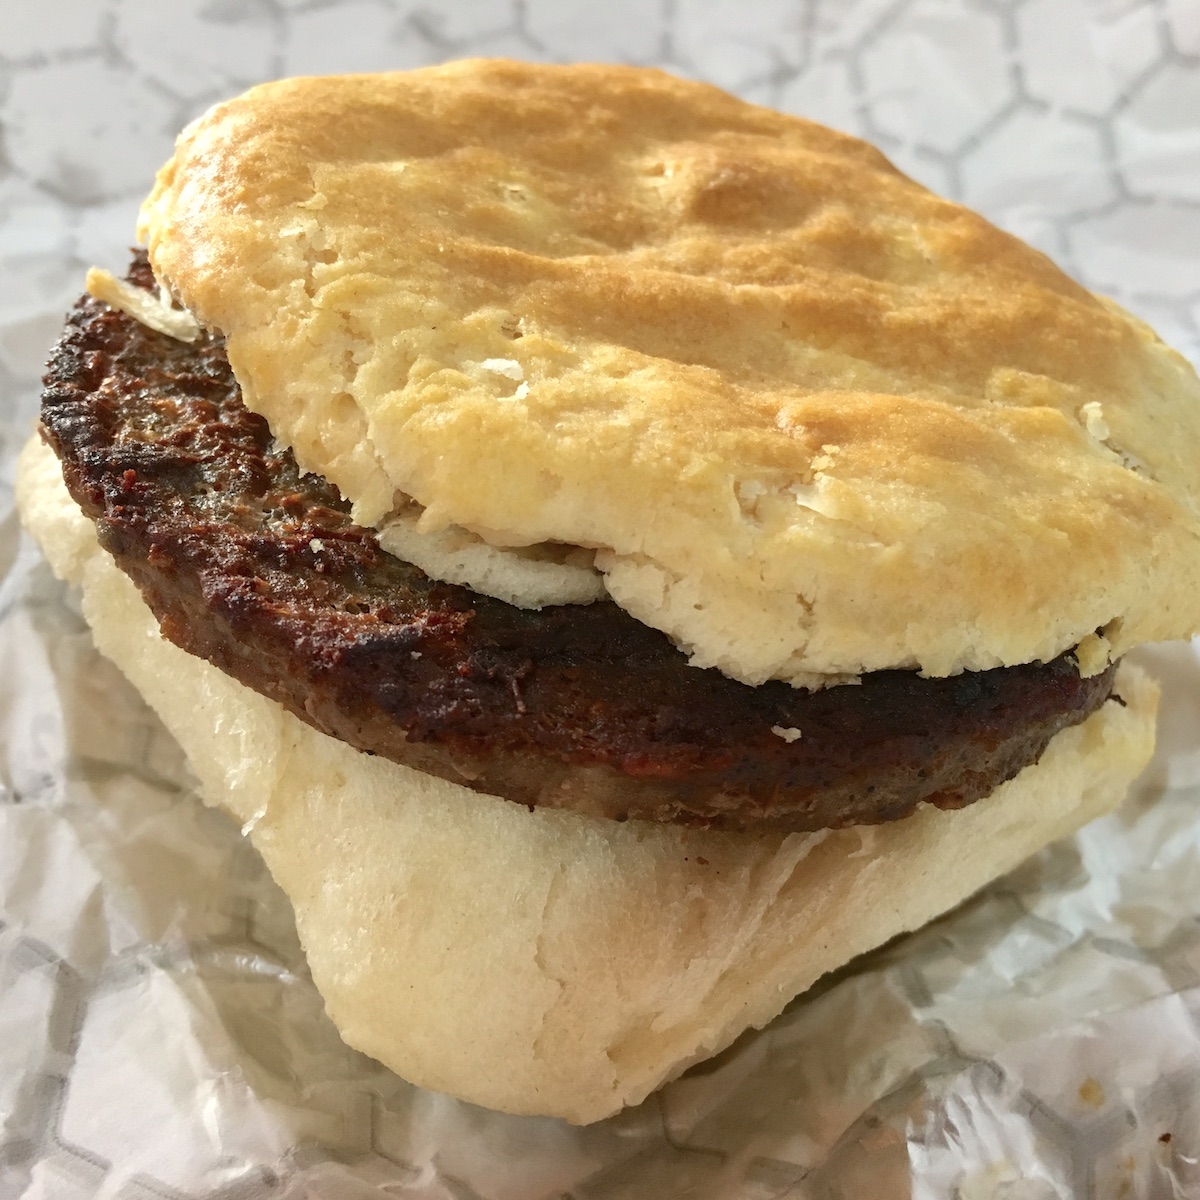 Sausage Biscuit from Carroll’s Sausage & Country Store in Ashburn, Georgia